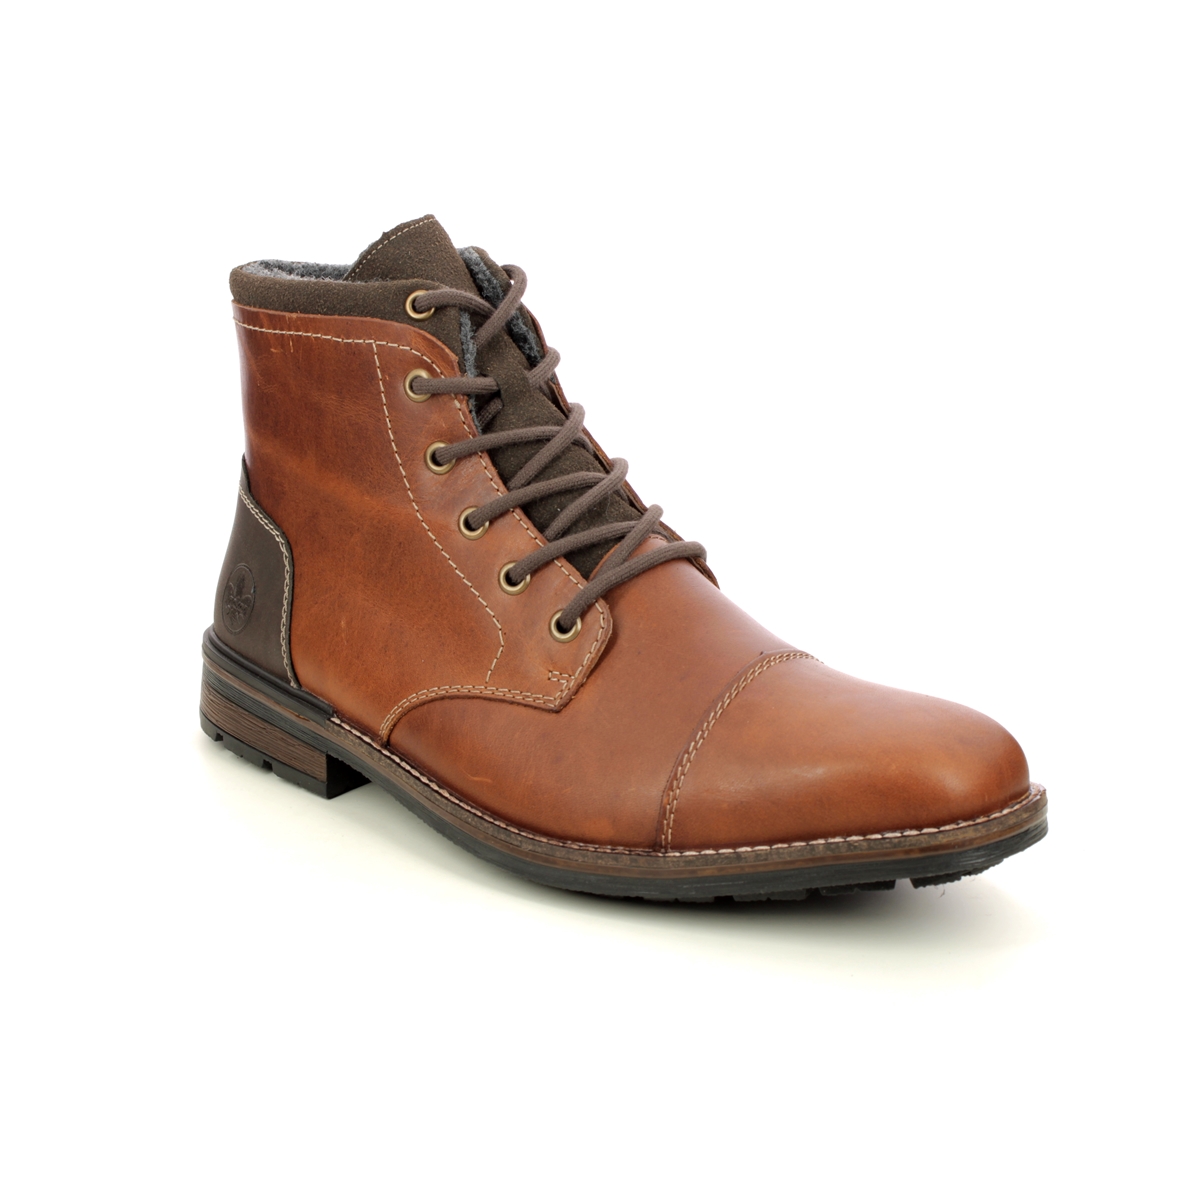 Rieker F1322-24 Brown leather Mens boots in a Plain Leather in Size 44